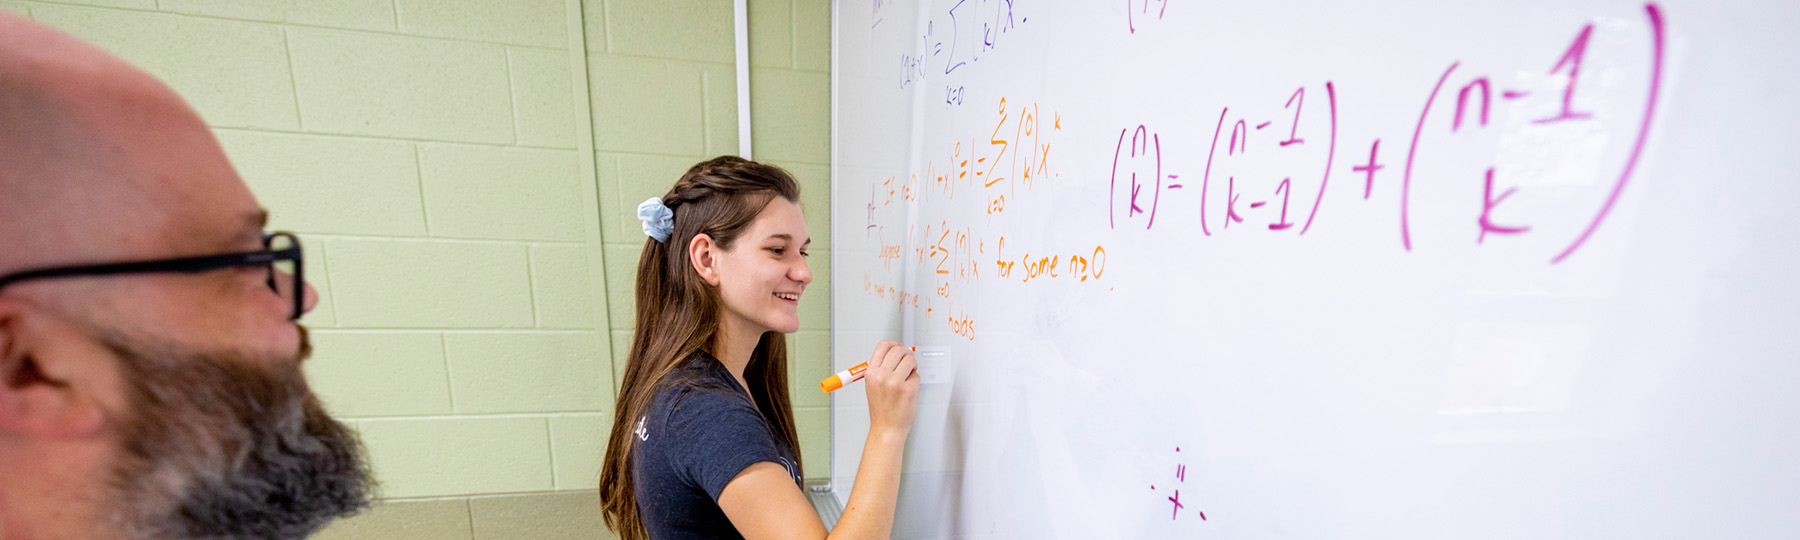 A student in a blue t-shirt completing a mathematics equation on a white board while being observed by a mathematics faculty member.